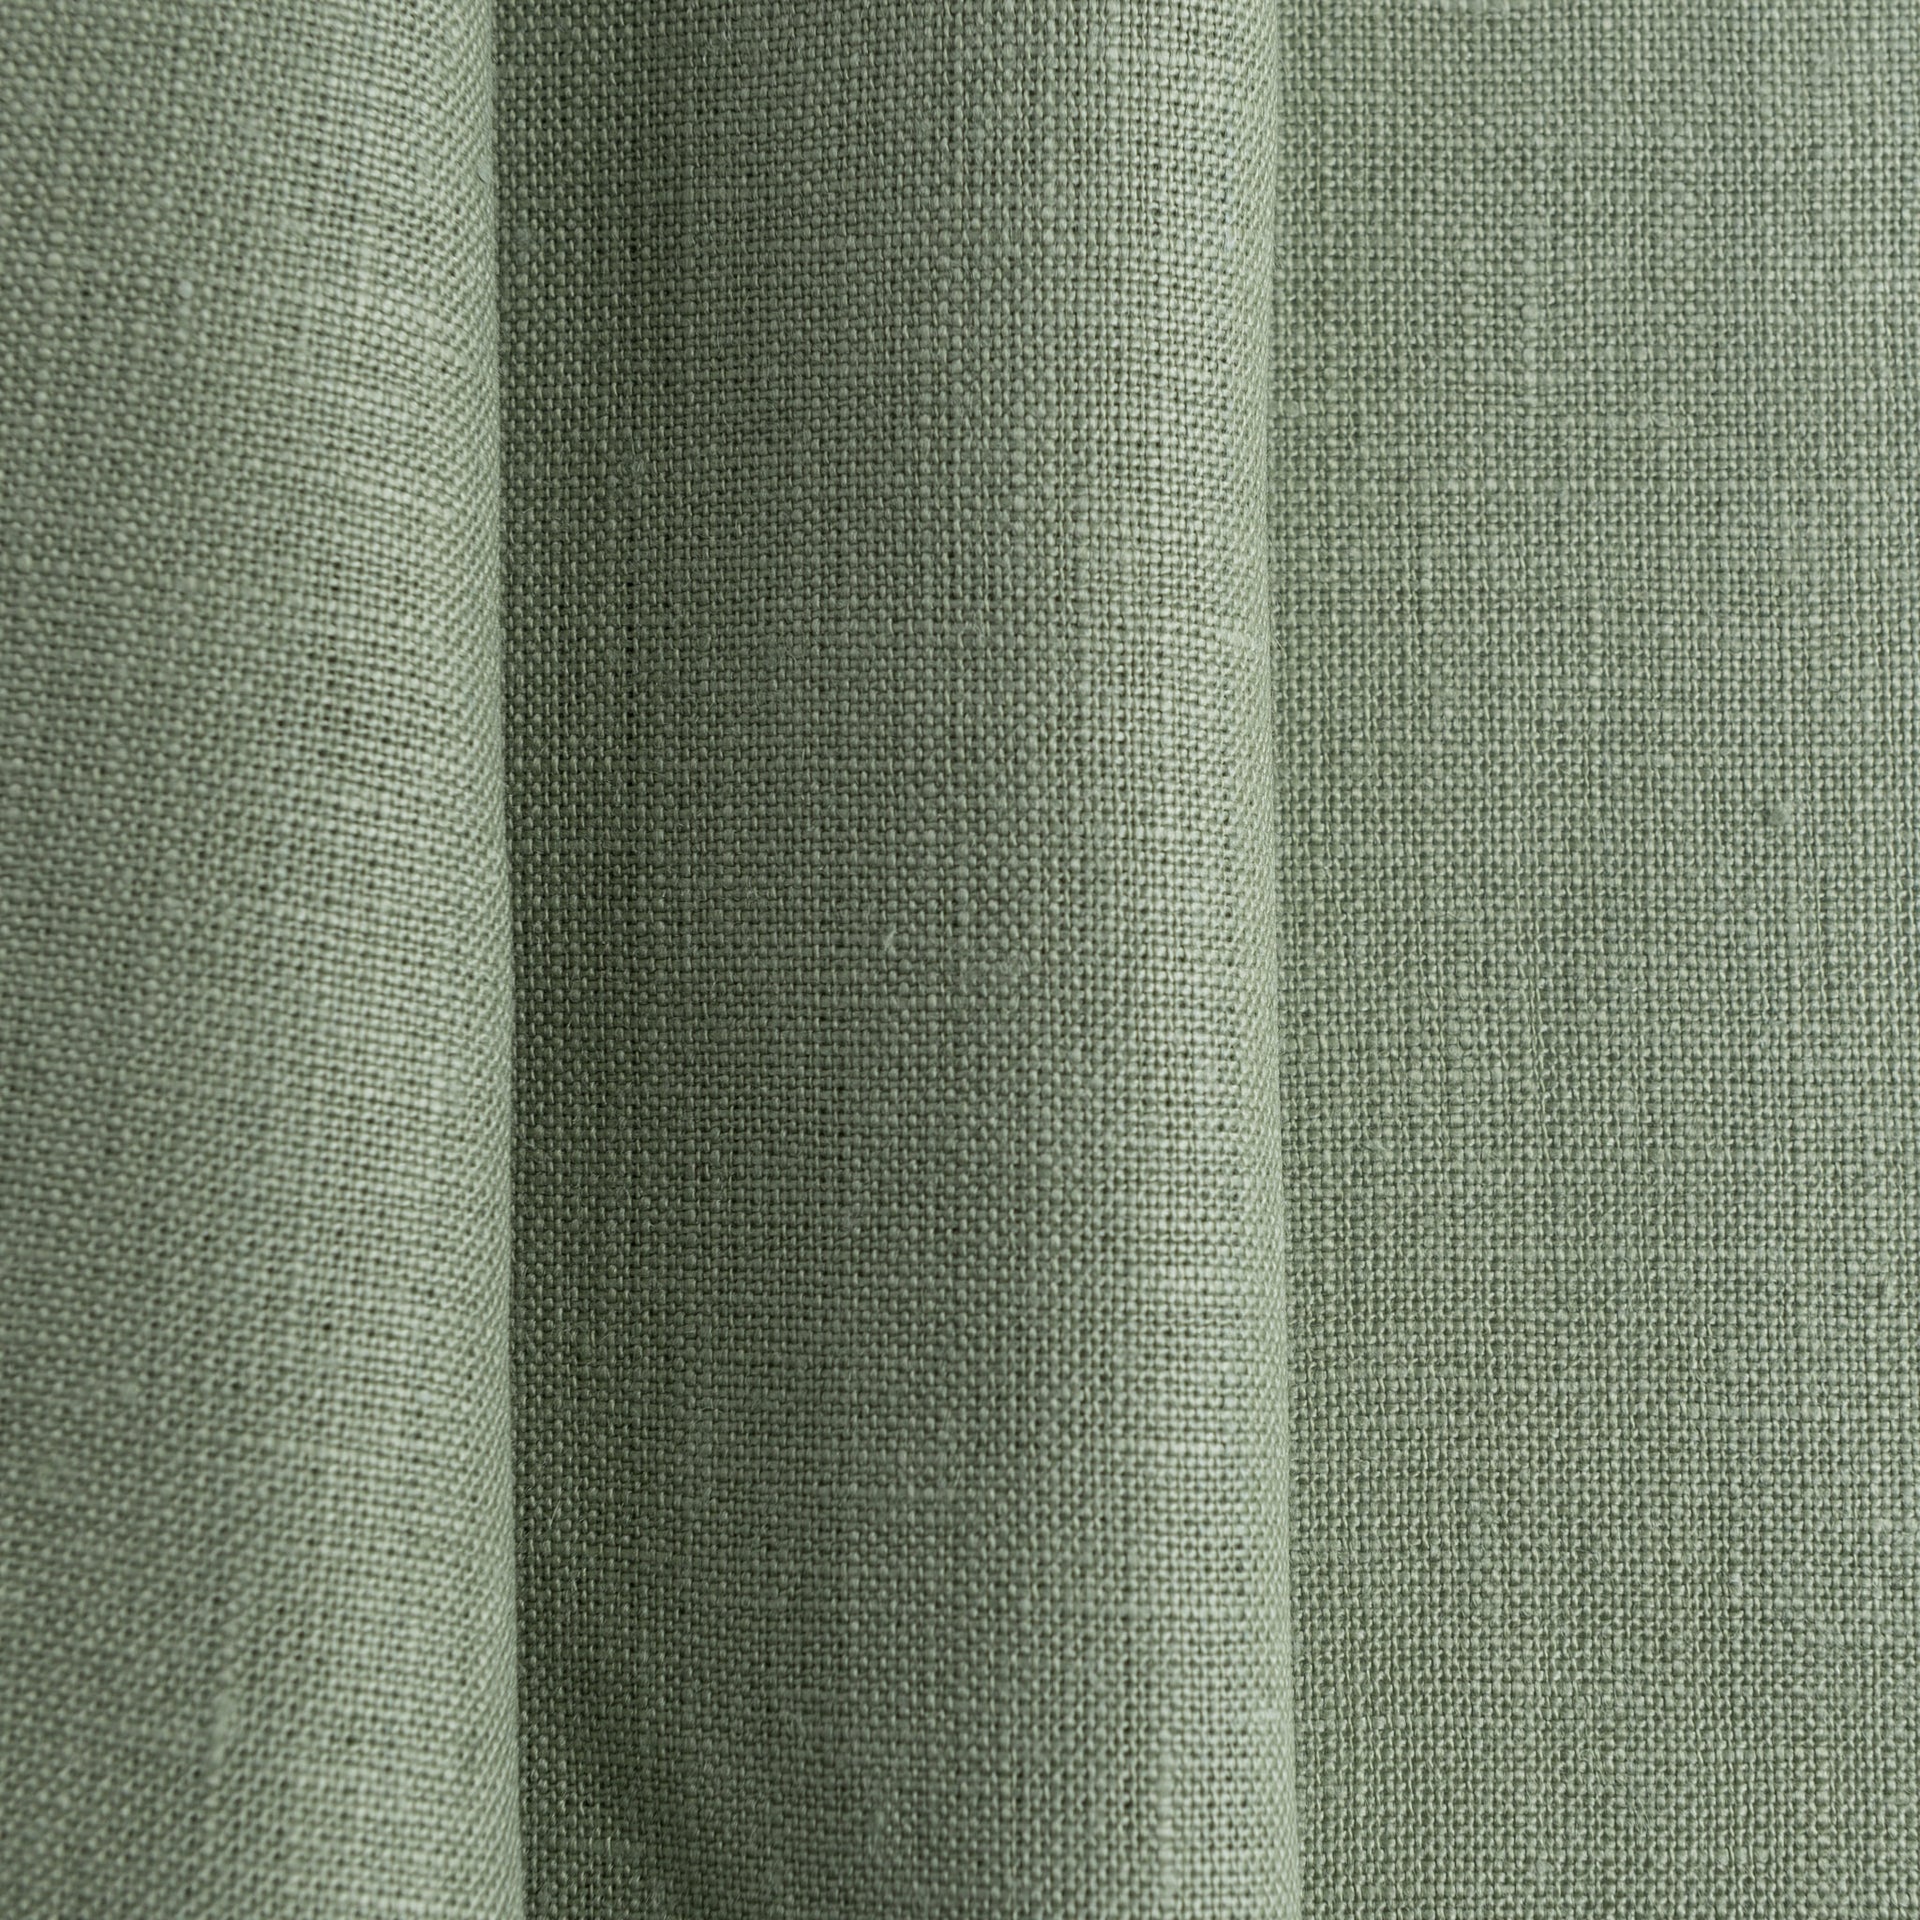 Green Blackout Linen Curtains with Back Tabs, Asparagus Color